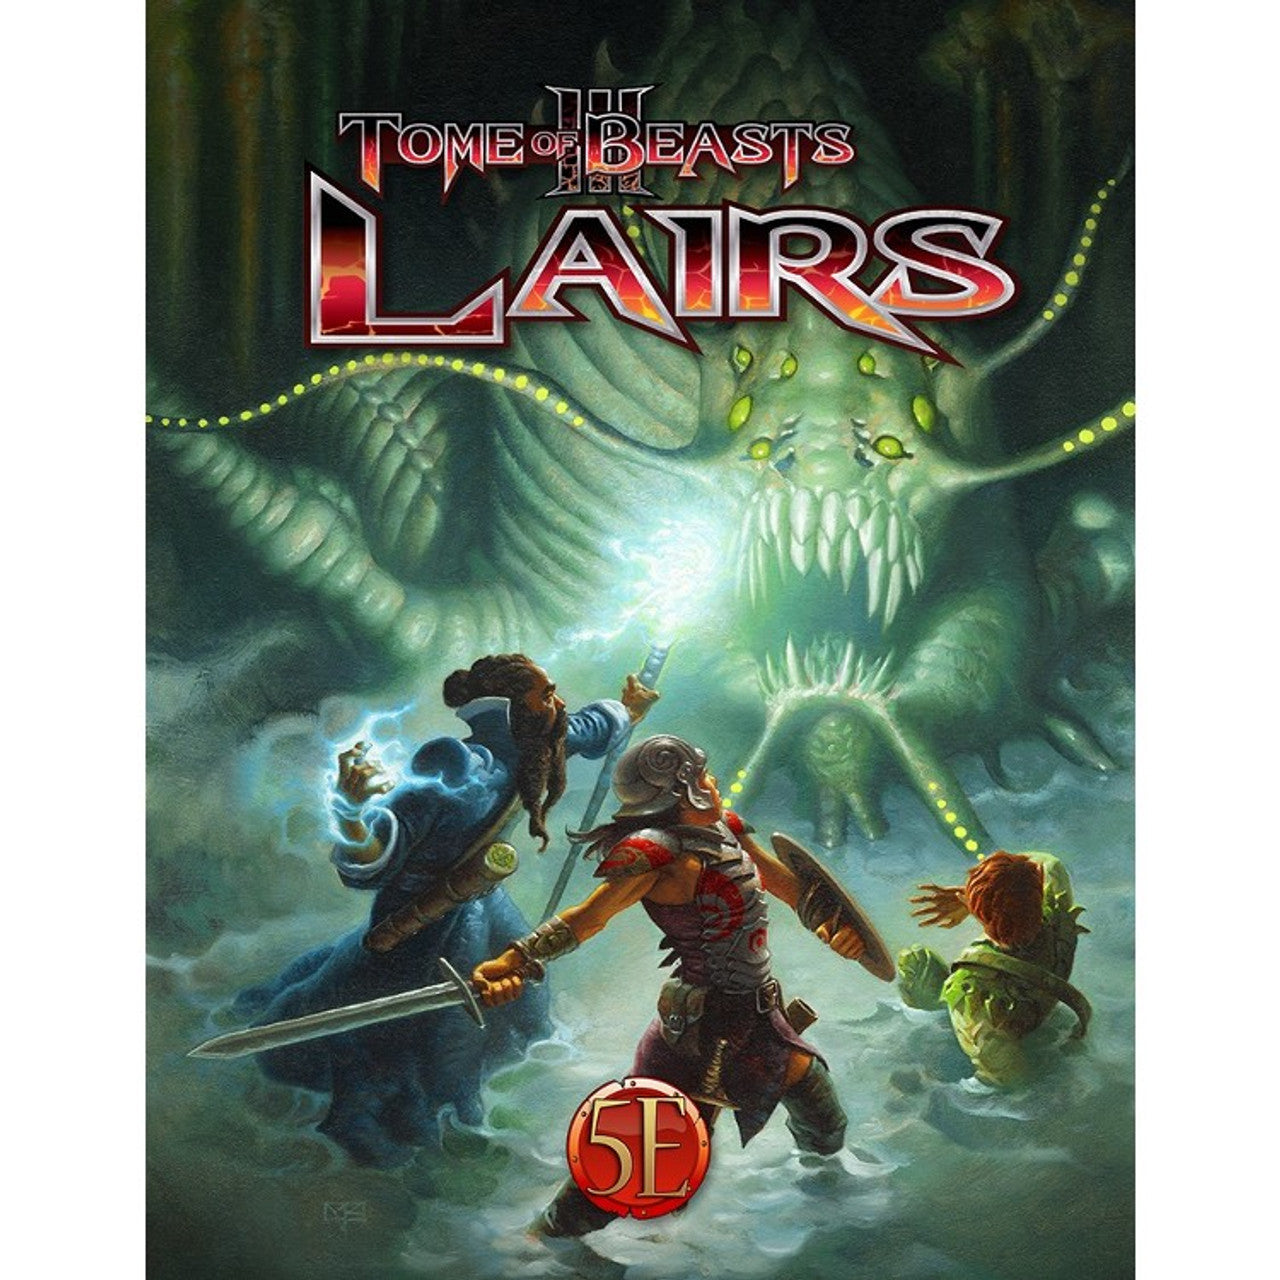 Tome of Beasts III: Lairs - Hardcover